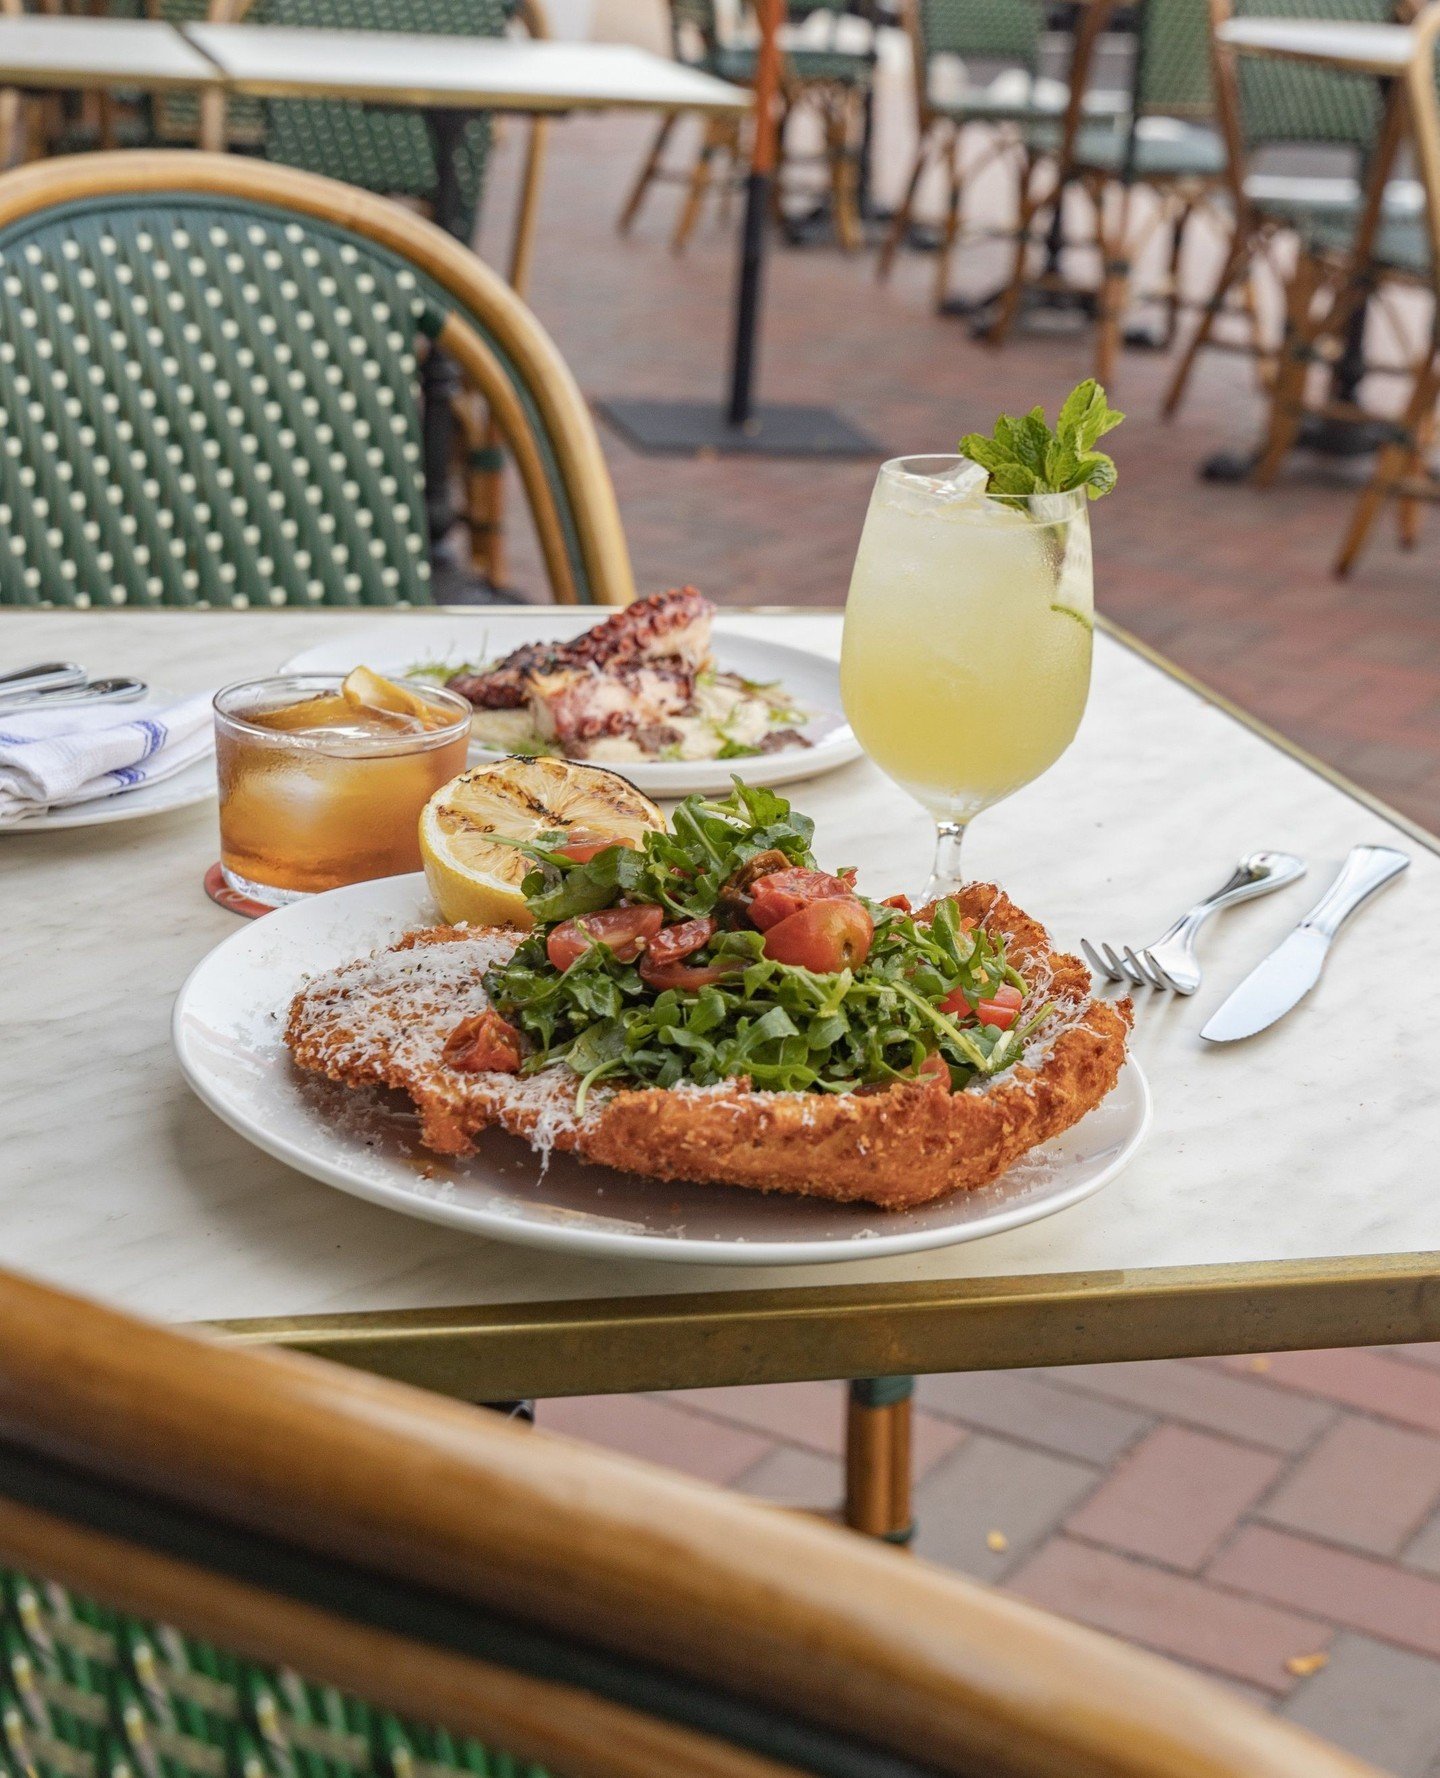 Our favorite way to dine in the springtime &ndash; al fresco style🌷